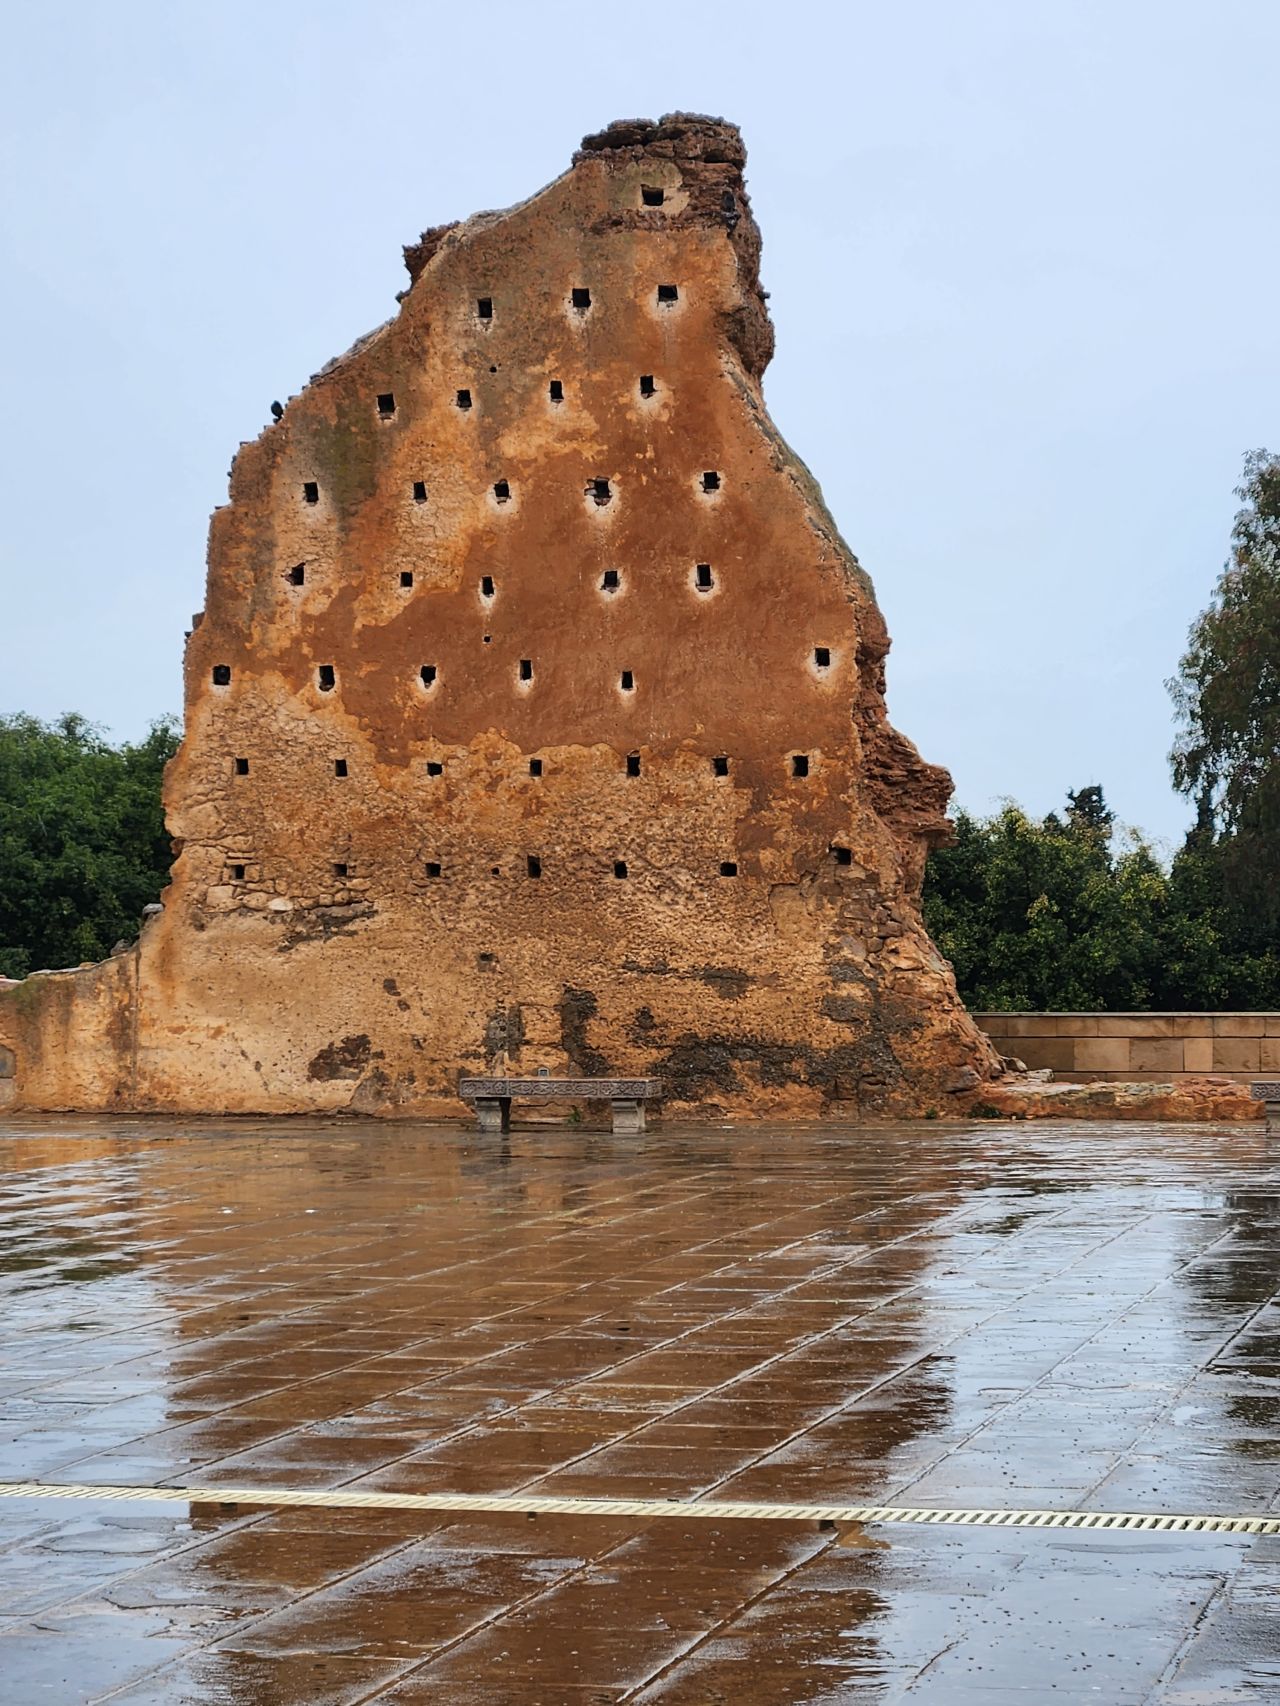 Grounds of the Royal Mausoleum of King Mohammed V and Hassan Tower in Rabat, Morocco.